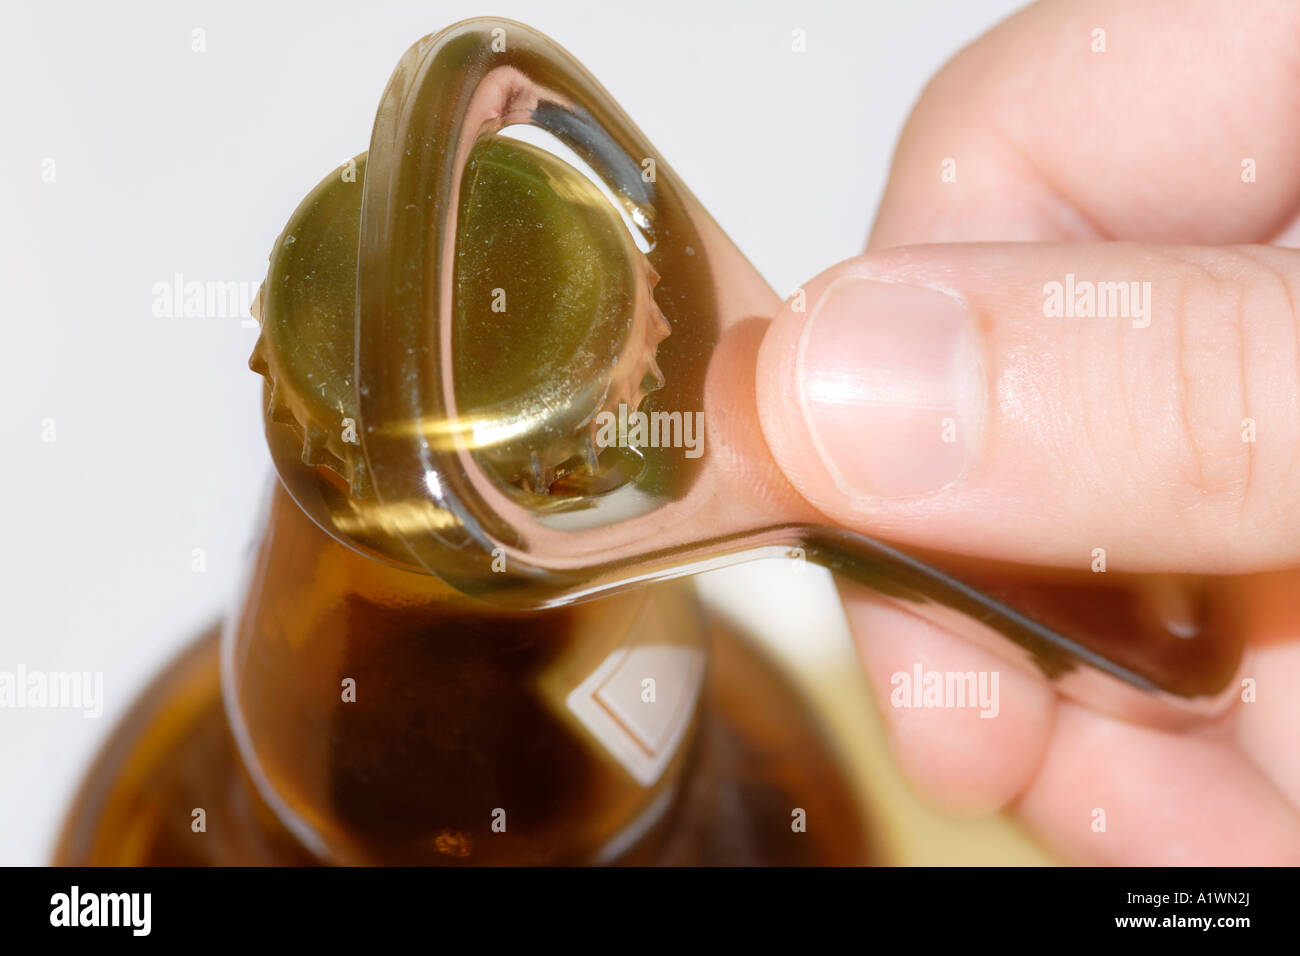 Person Opening bottle of beer with opener Stock Photo